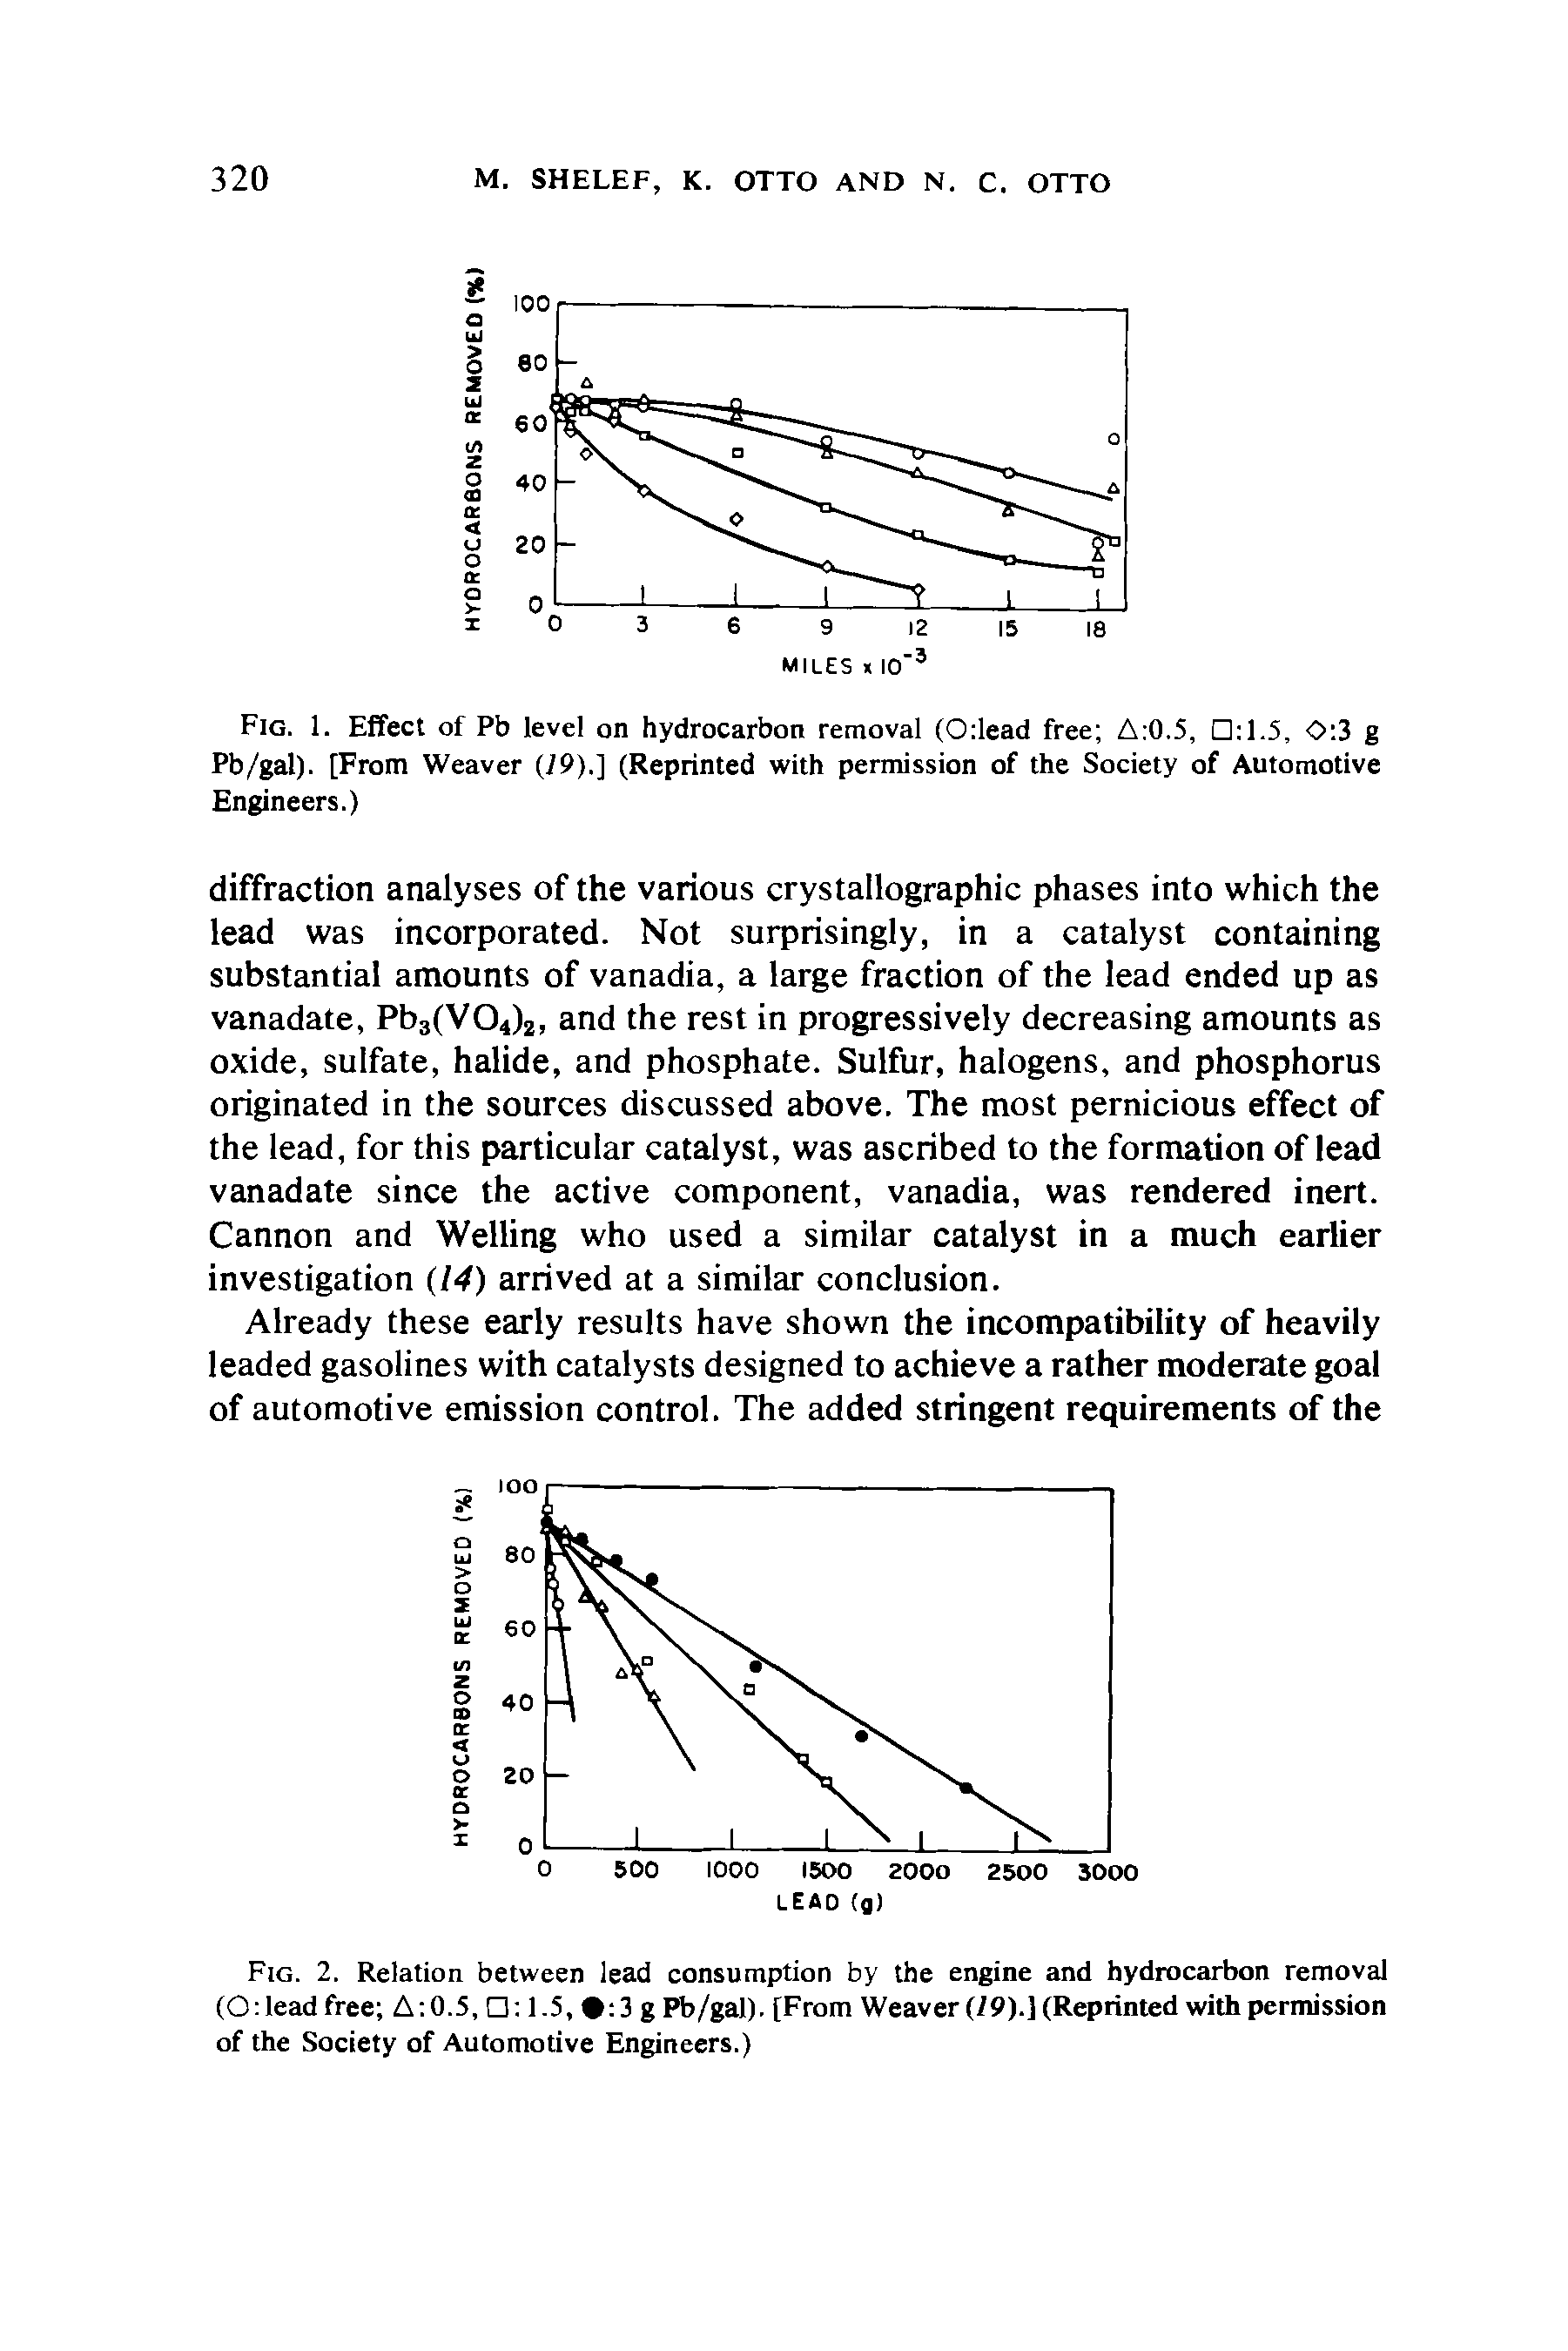 Fig. 2. Relation between lead consumption by the engine and hydrocarbon removal (O lead free A 0.5, 1.5, 3 g Pb/gal). [From Weaver (79).] (Reprinted with permission of the Society of Automotive Engineers.)...